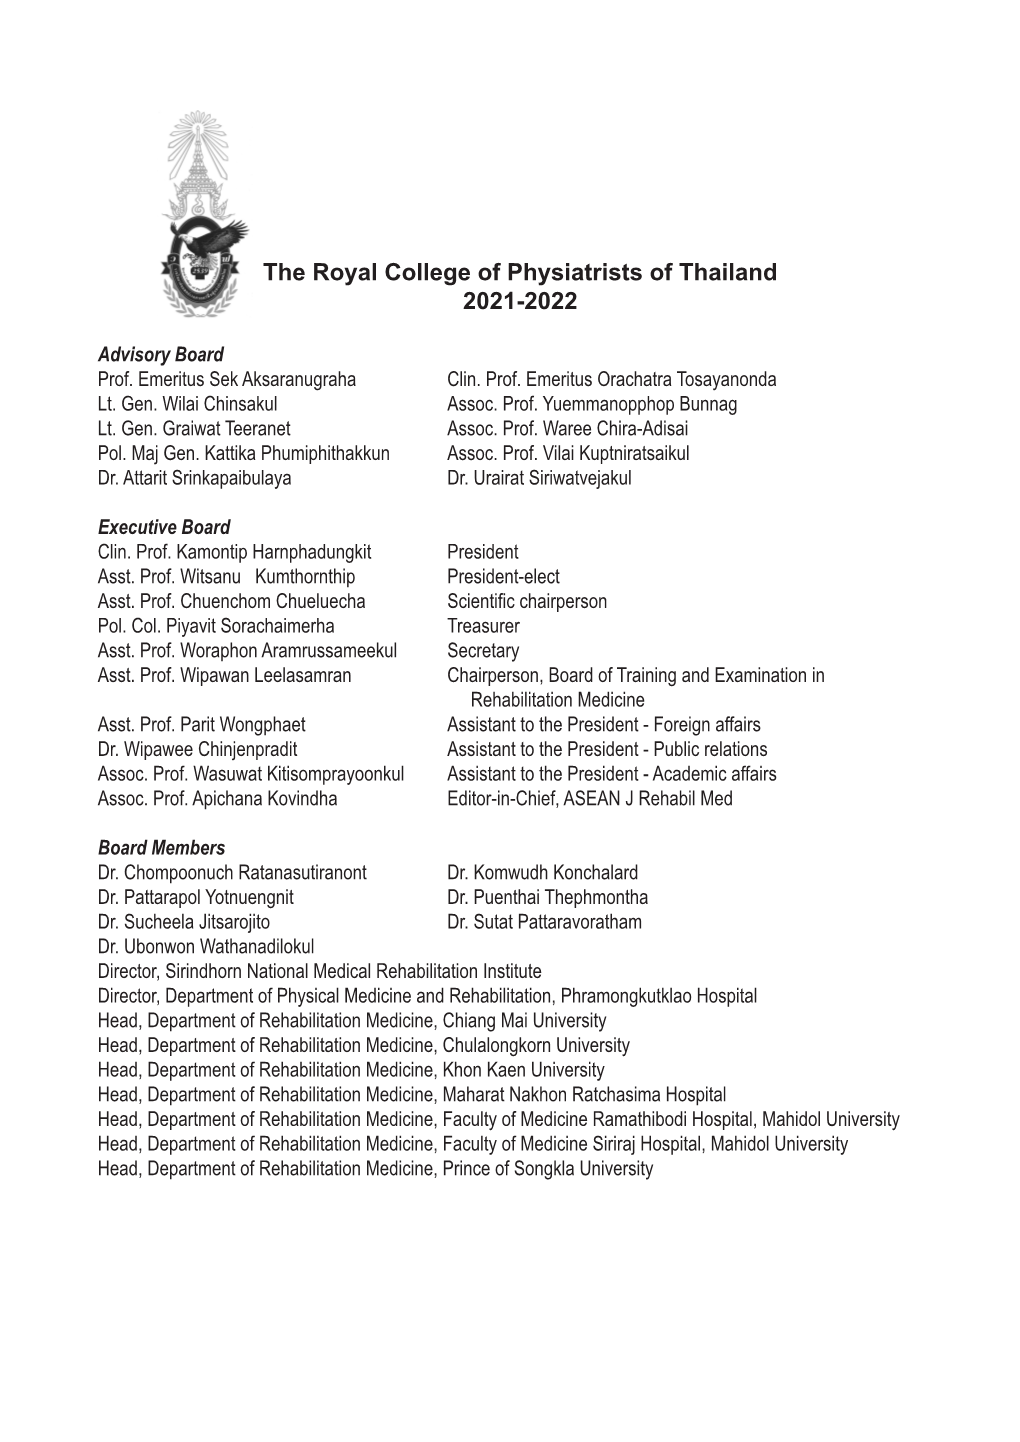 The Royal College of Physiatrists of Thailand 2021-2022